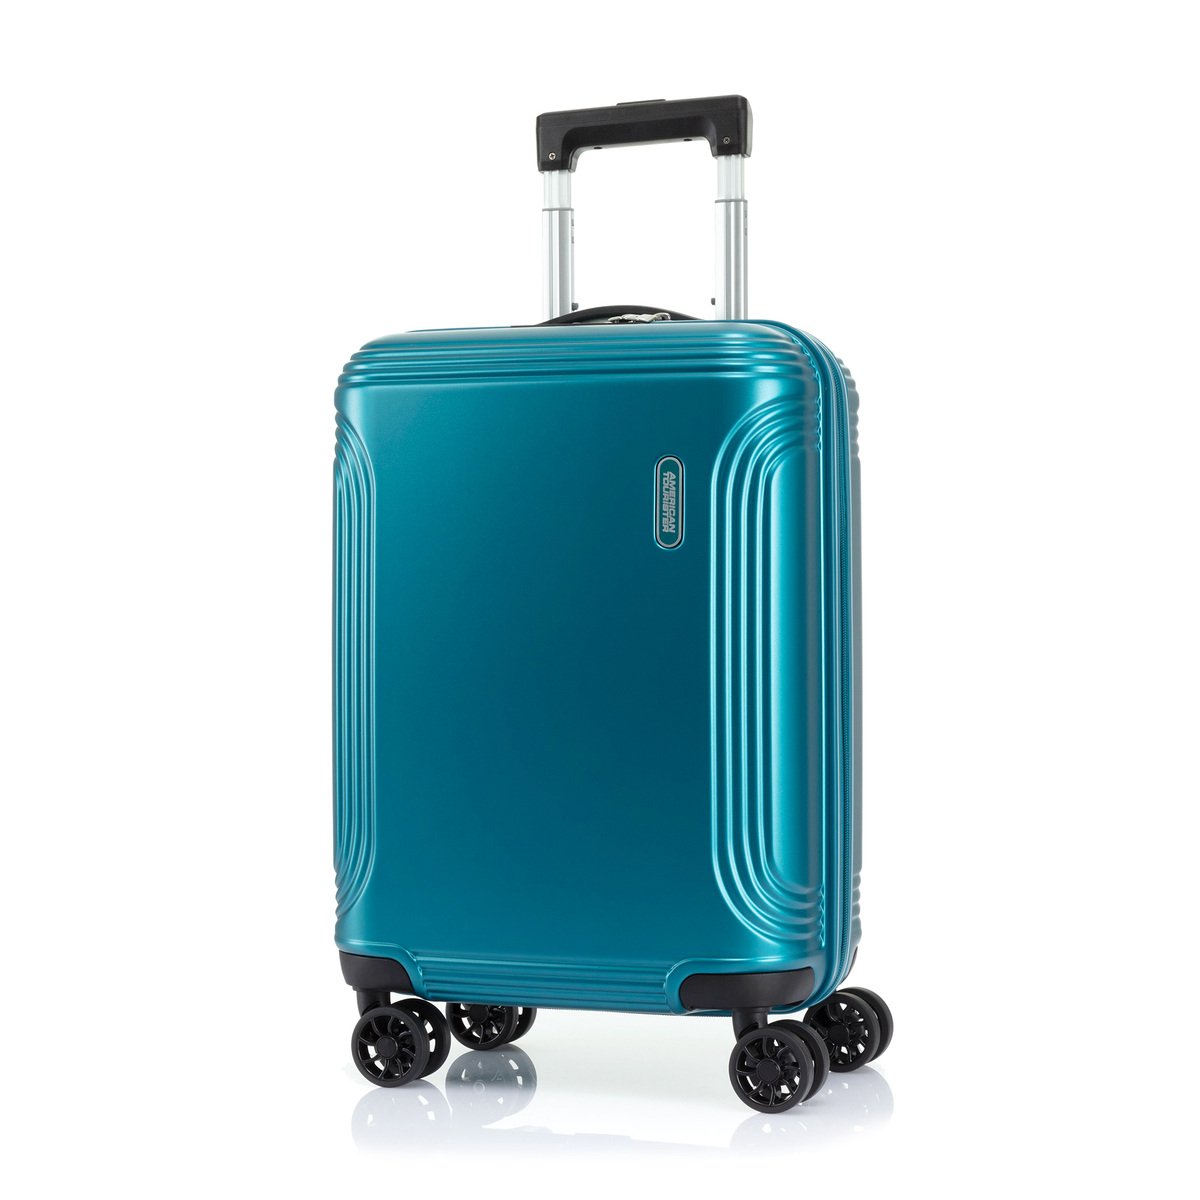 American Tourister Hypebeat Hard Trolley 79cm Teal